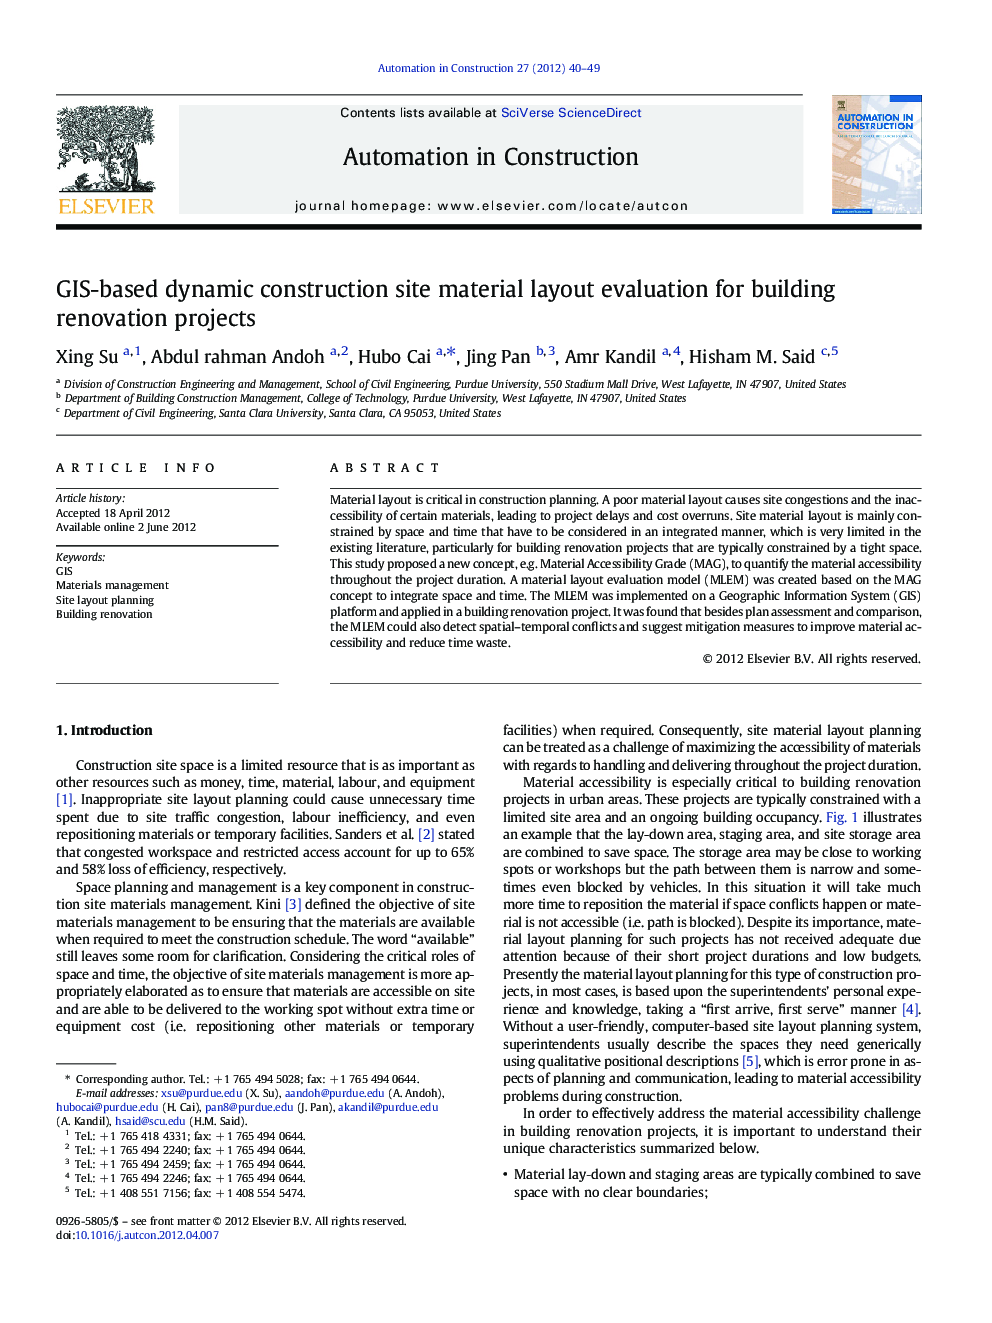 GIS-based dynamic construction site material layout evaluation for building renovation projects